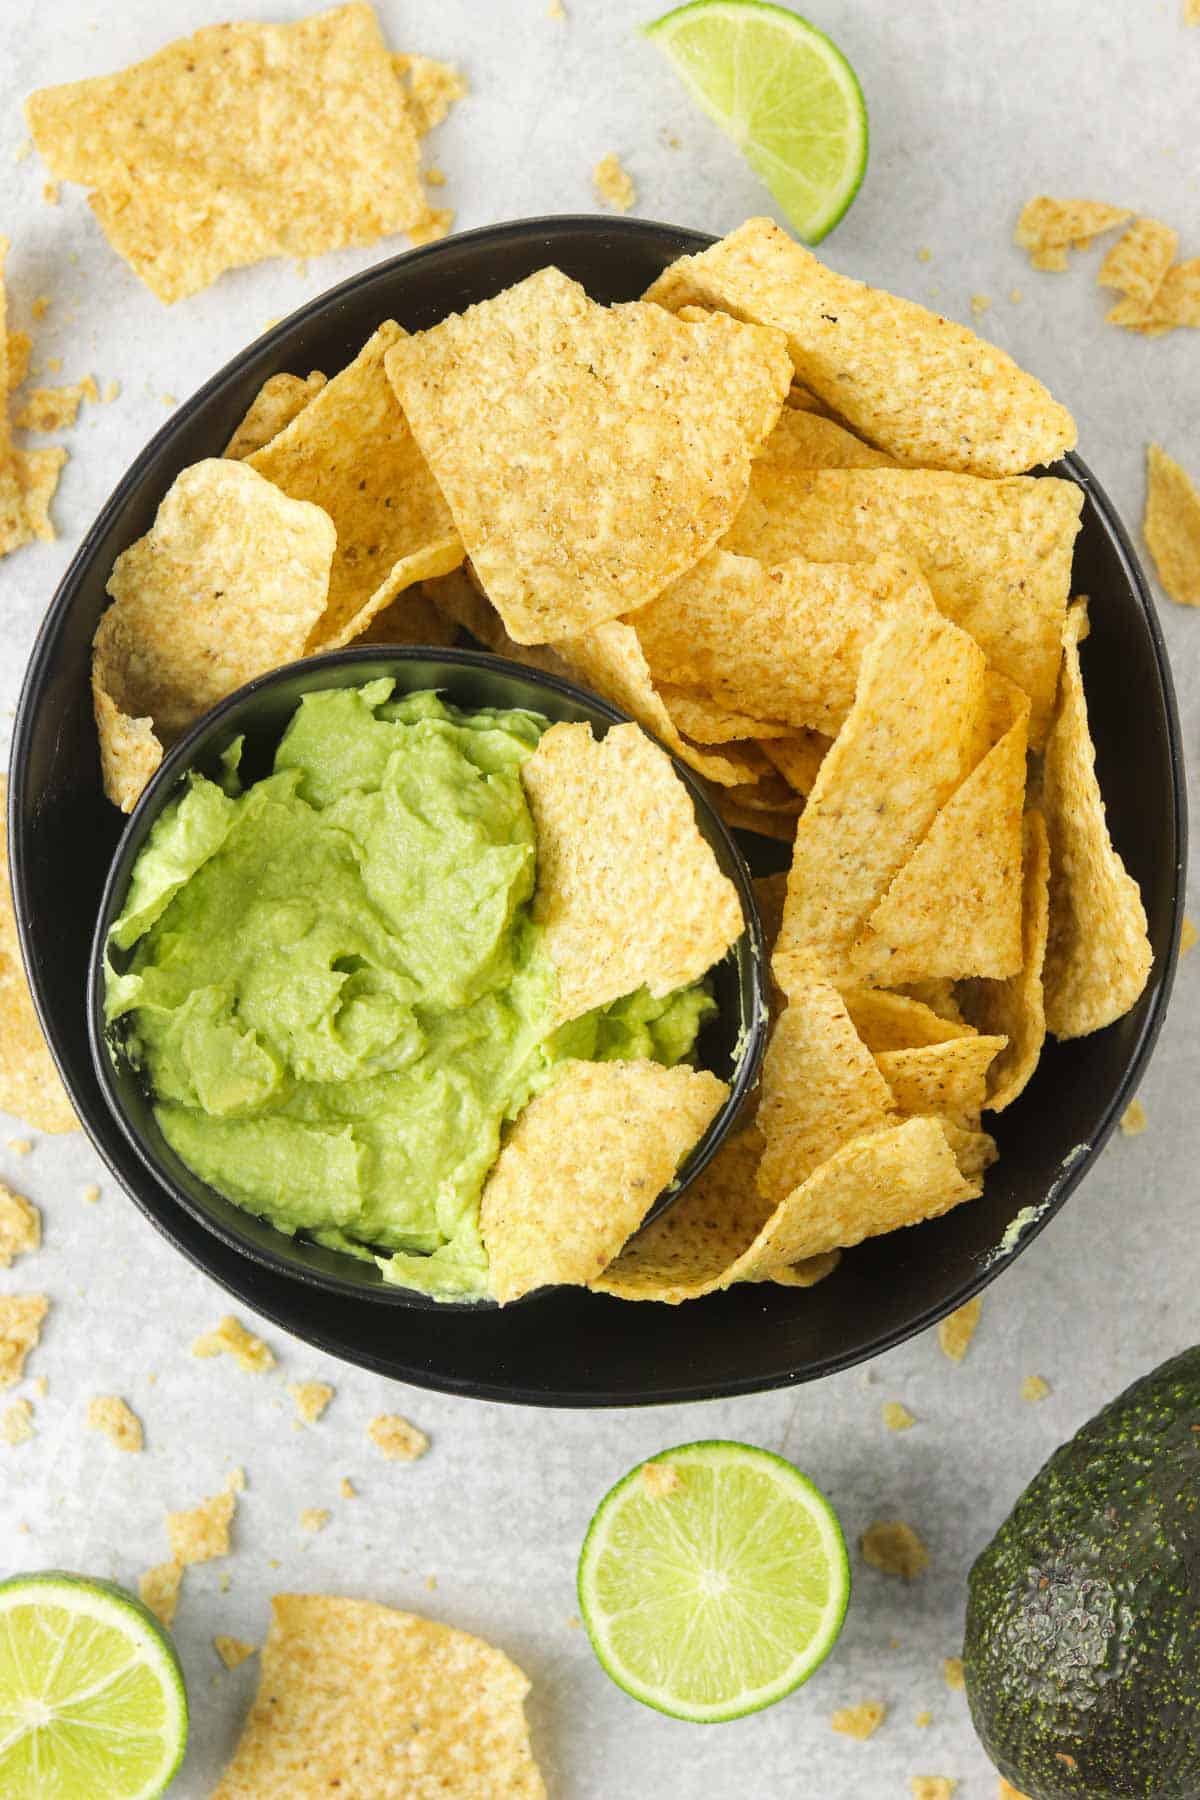 A bowl of avocado lime crema with tortillas chips.